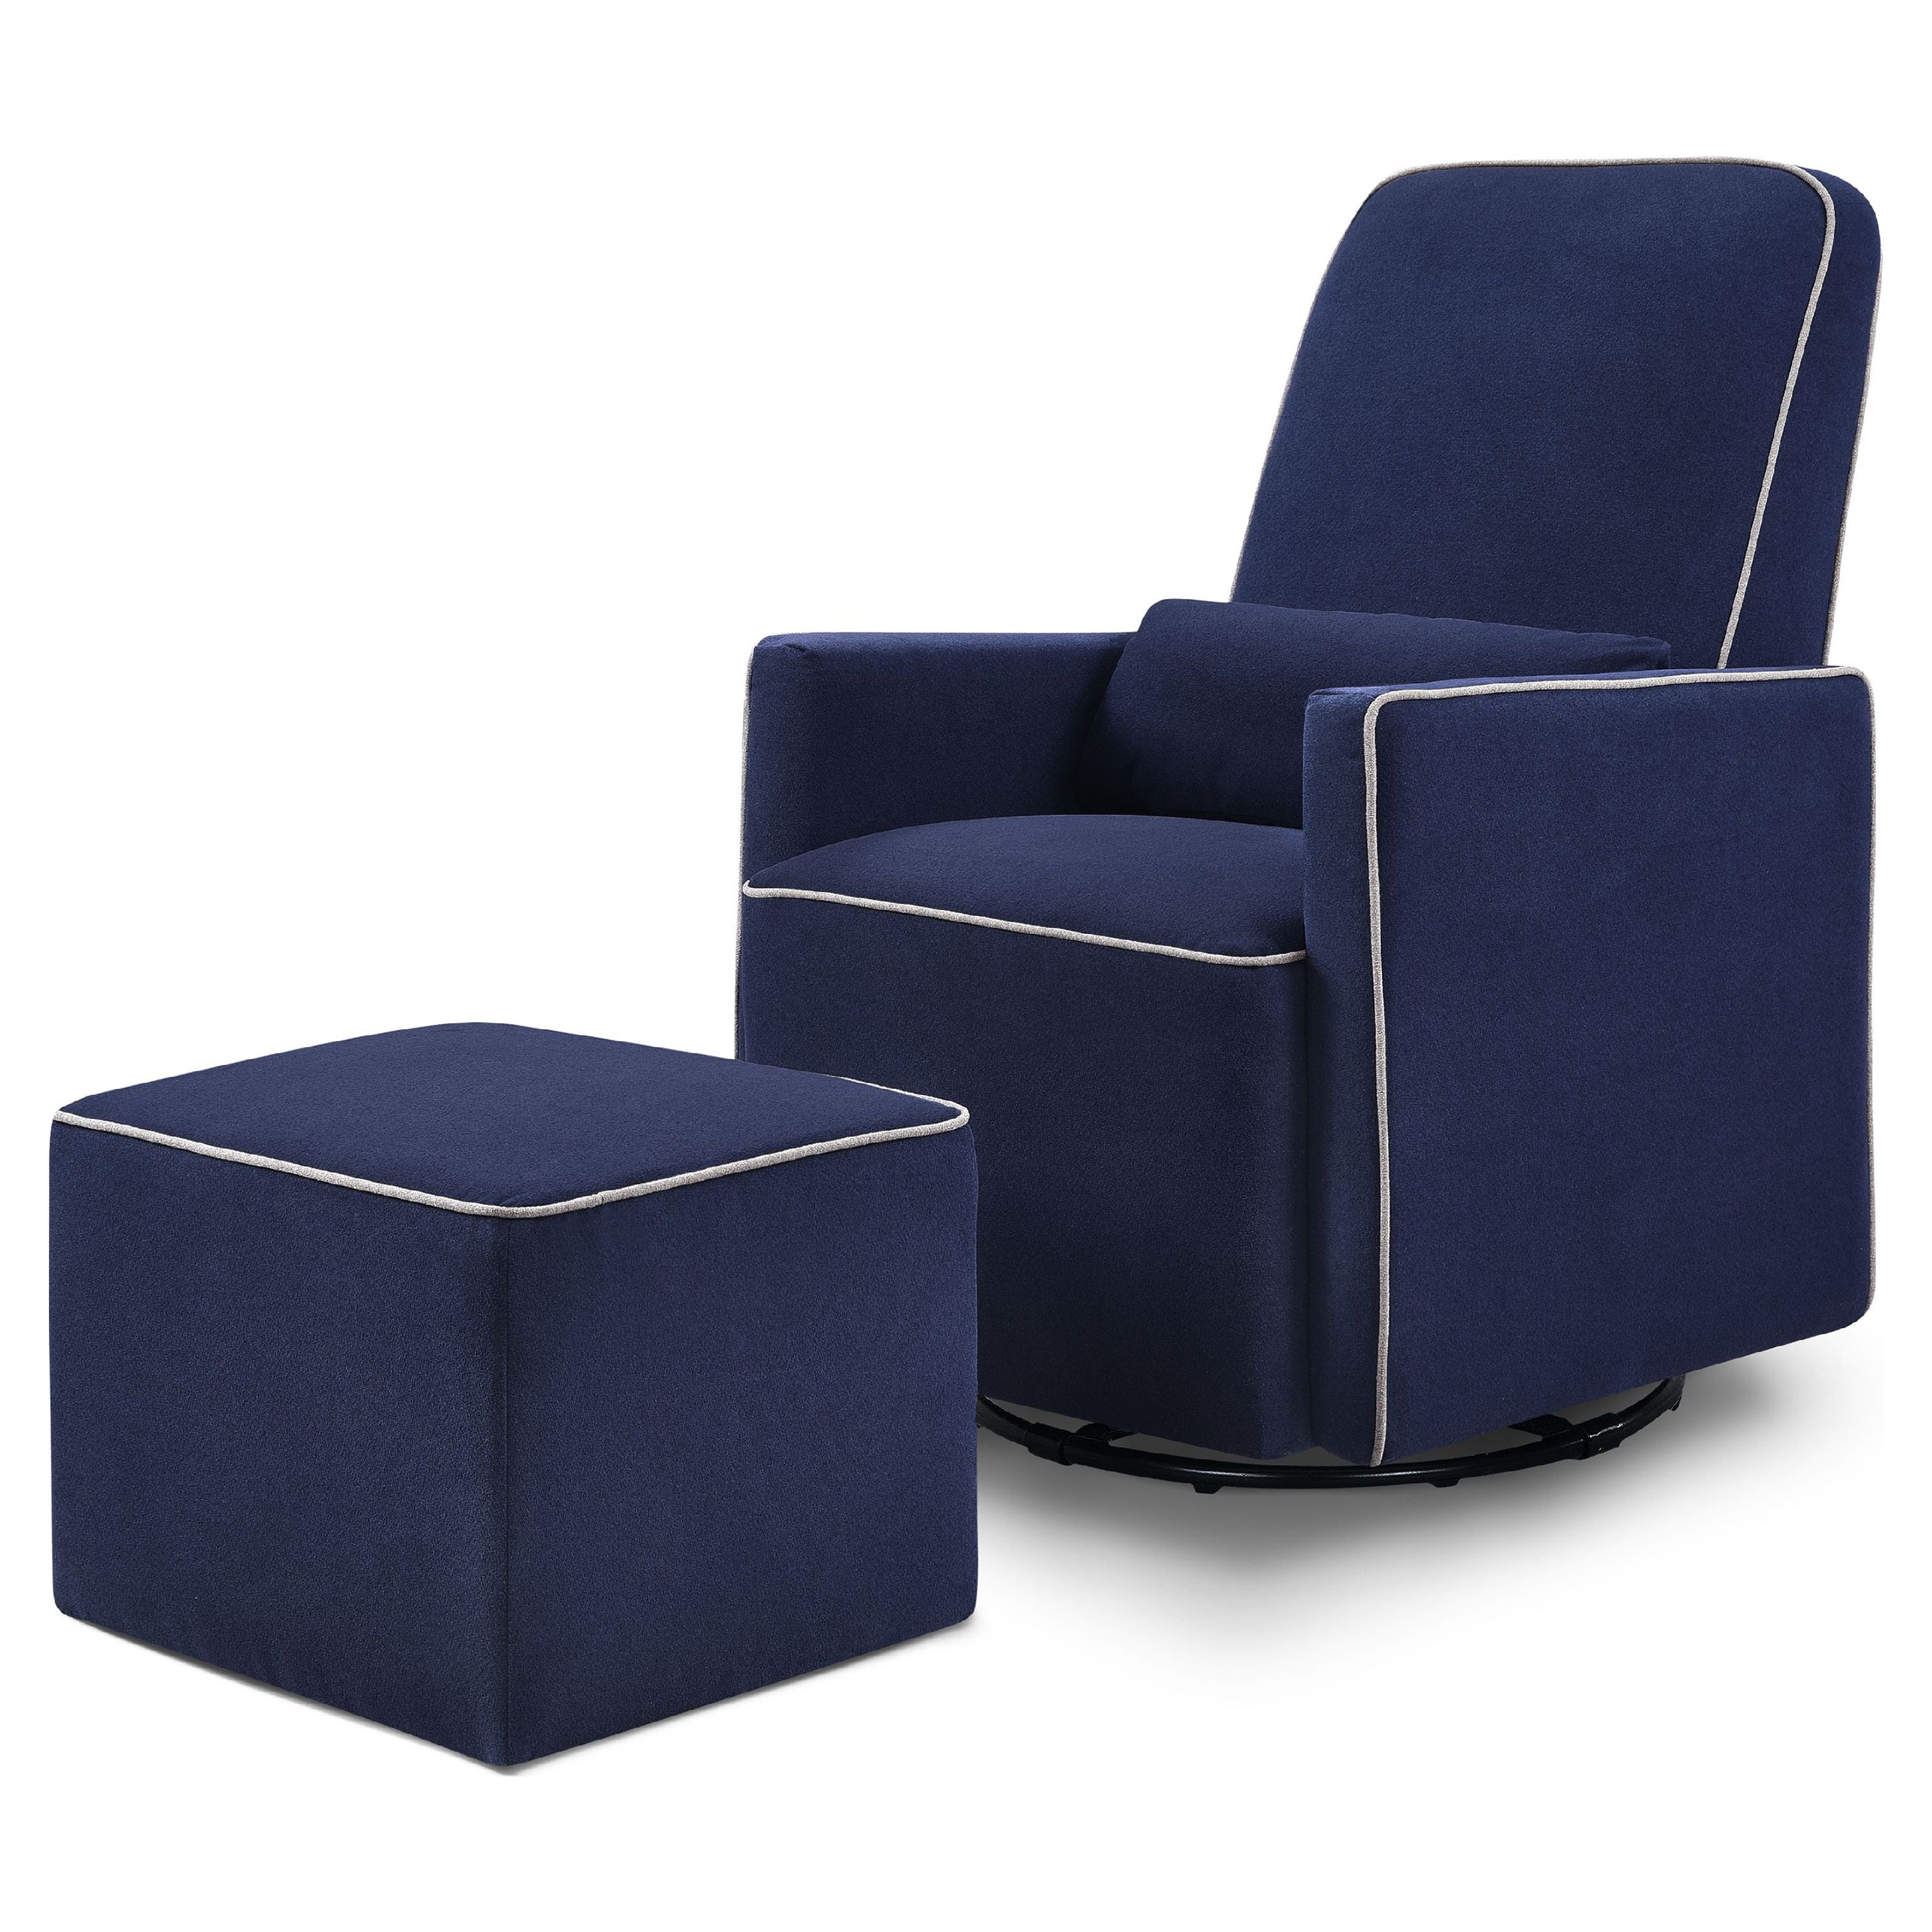 DaVinci Baby Olive Glider and Ottoman, Navy and Grey - image 3 of 10